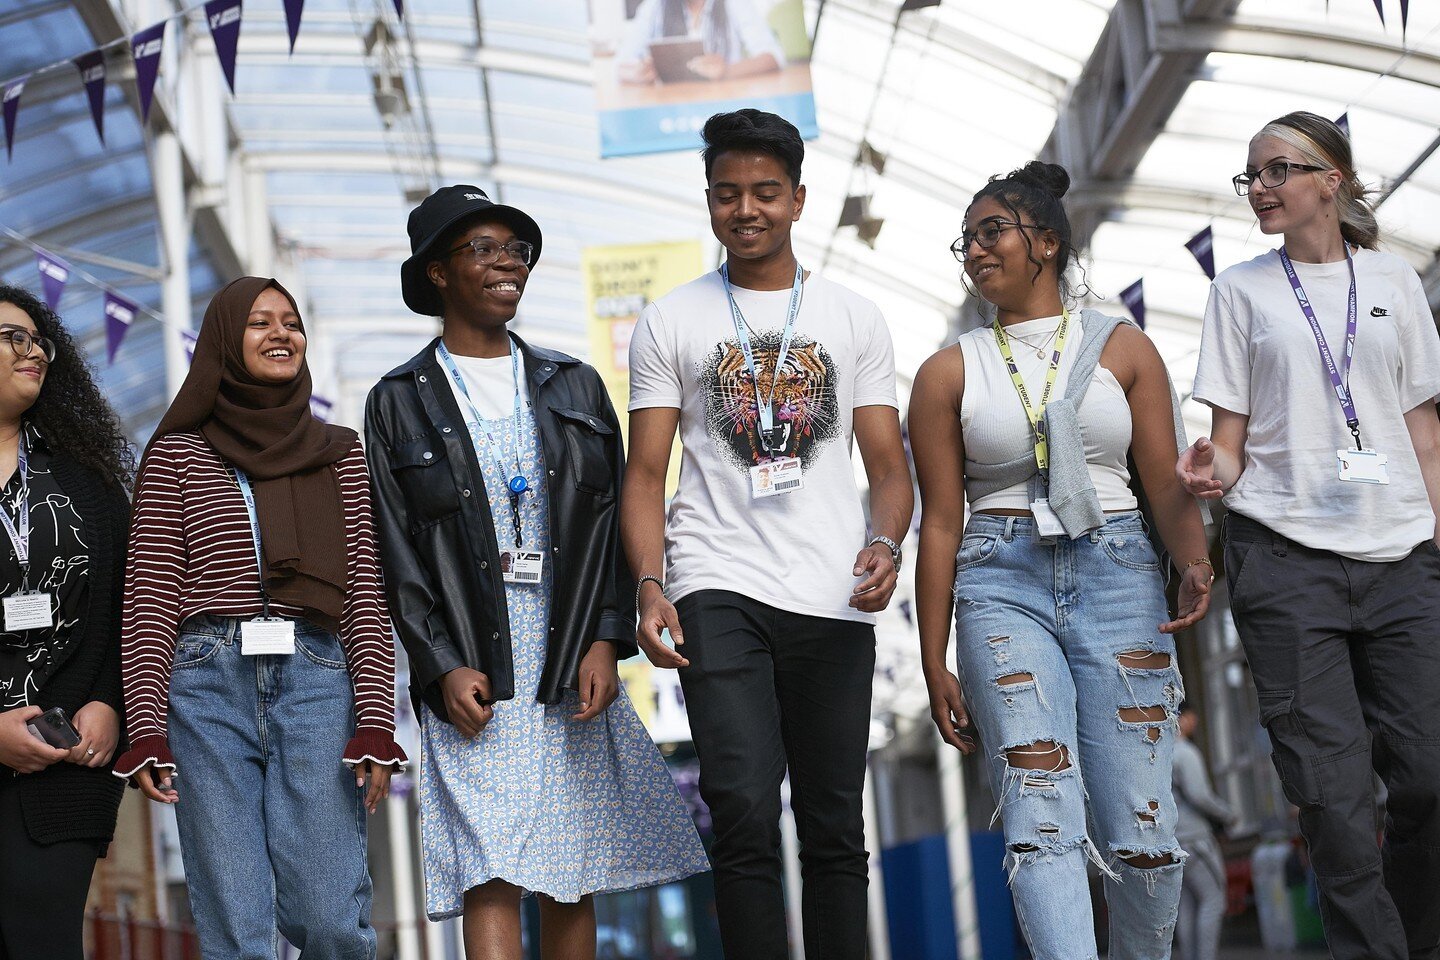 Hear from NewVIc students - authentic voices, creative talent and fresh thoughts on the things that really matter to young people.

Read more: https://newvic.ac.uk/student-blog

#TogetherWeAreNewVIc